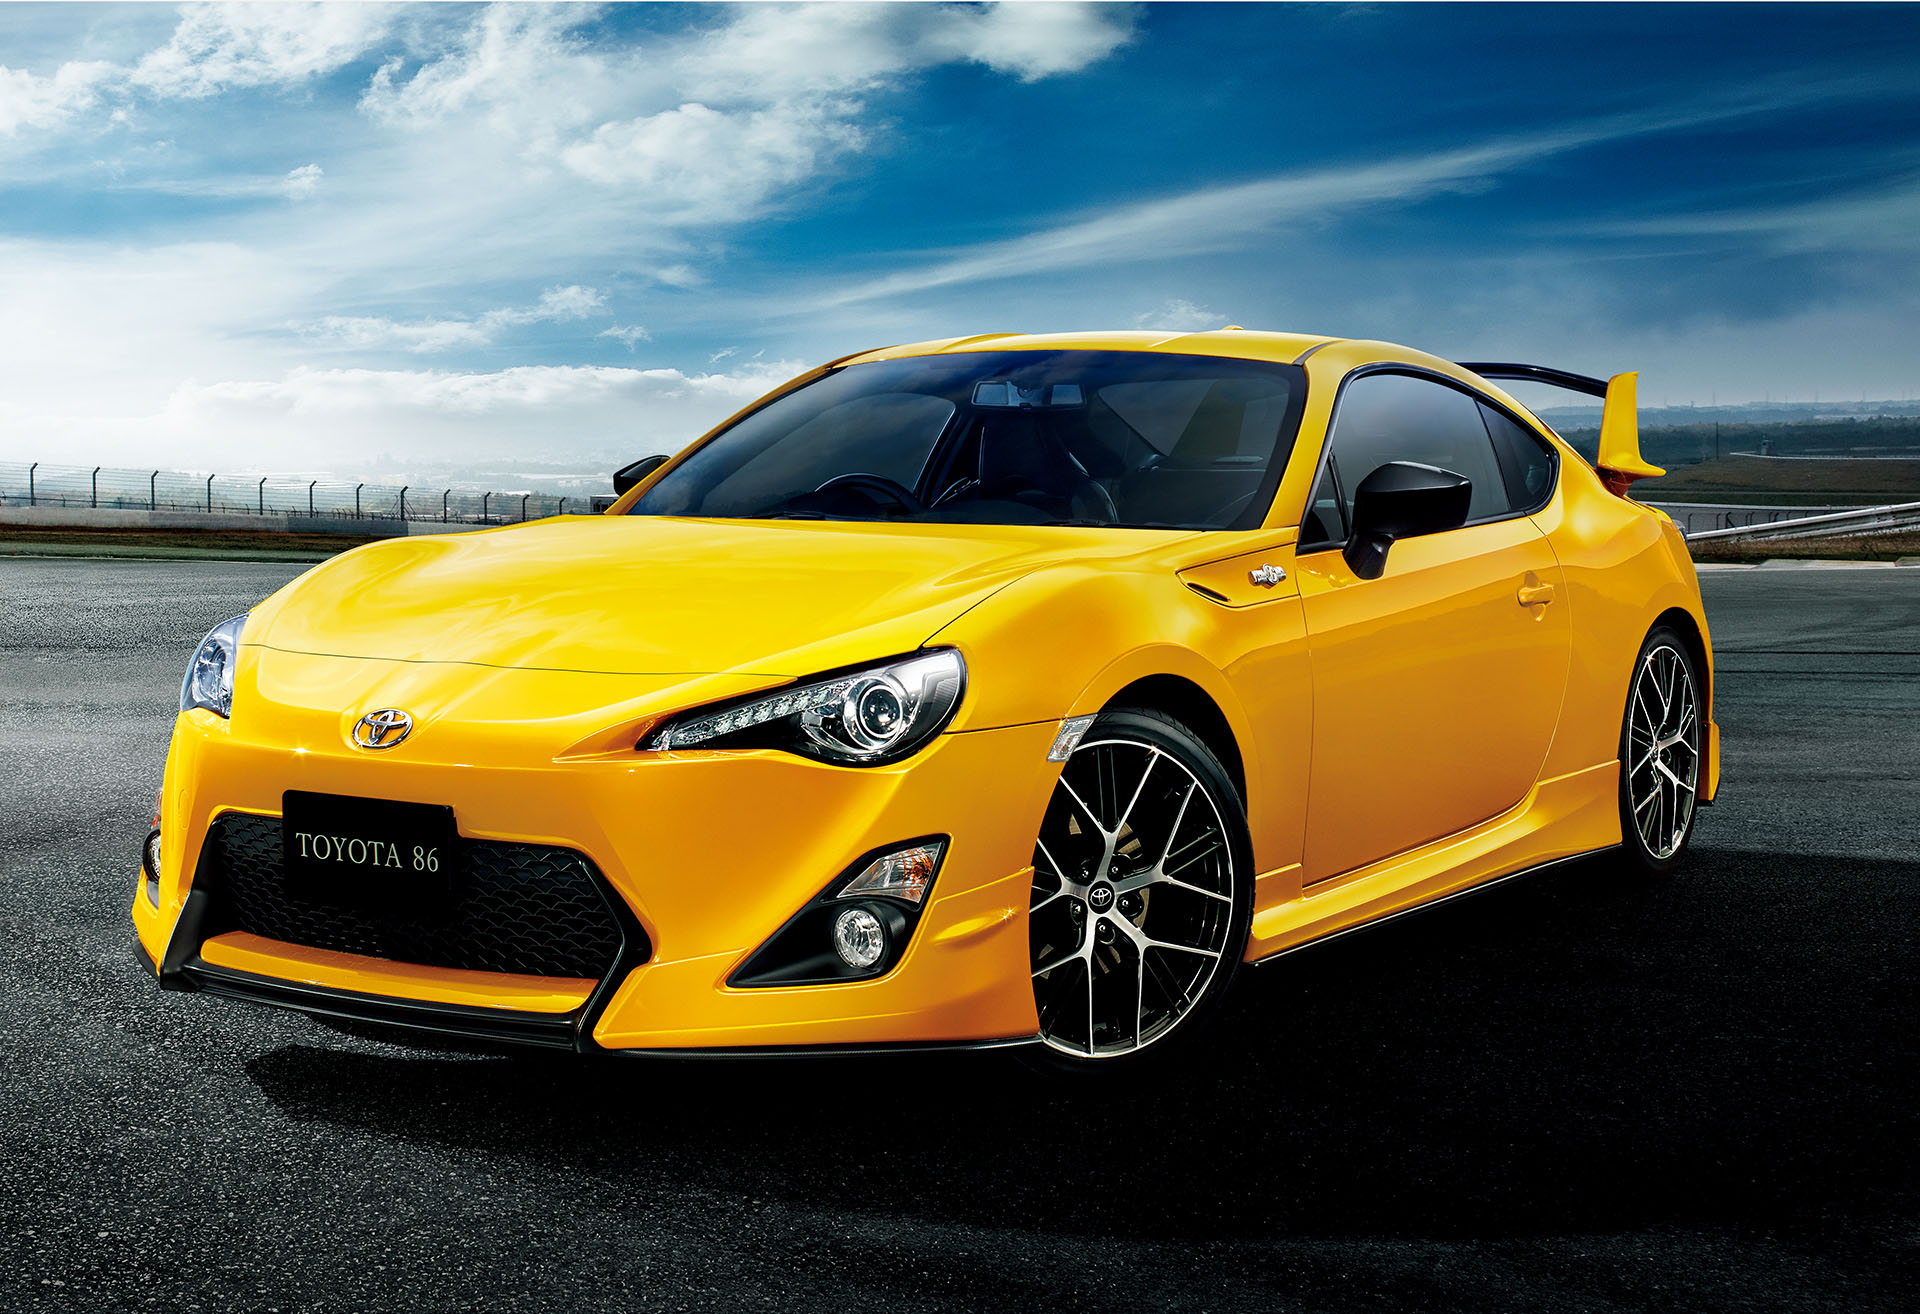 2015 Toyota GT 86 Yellow Limited